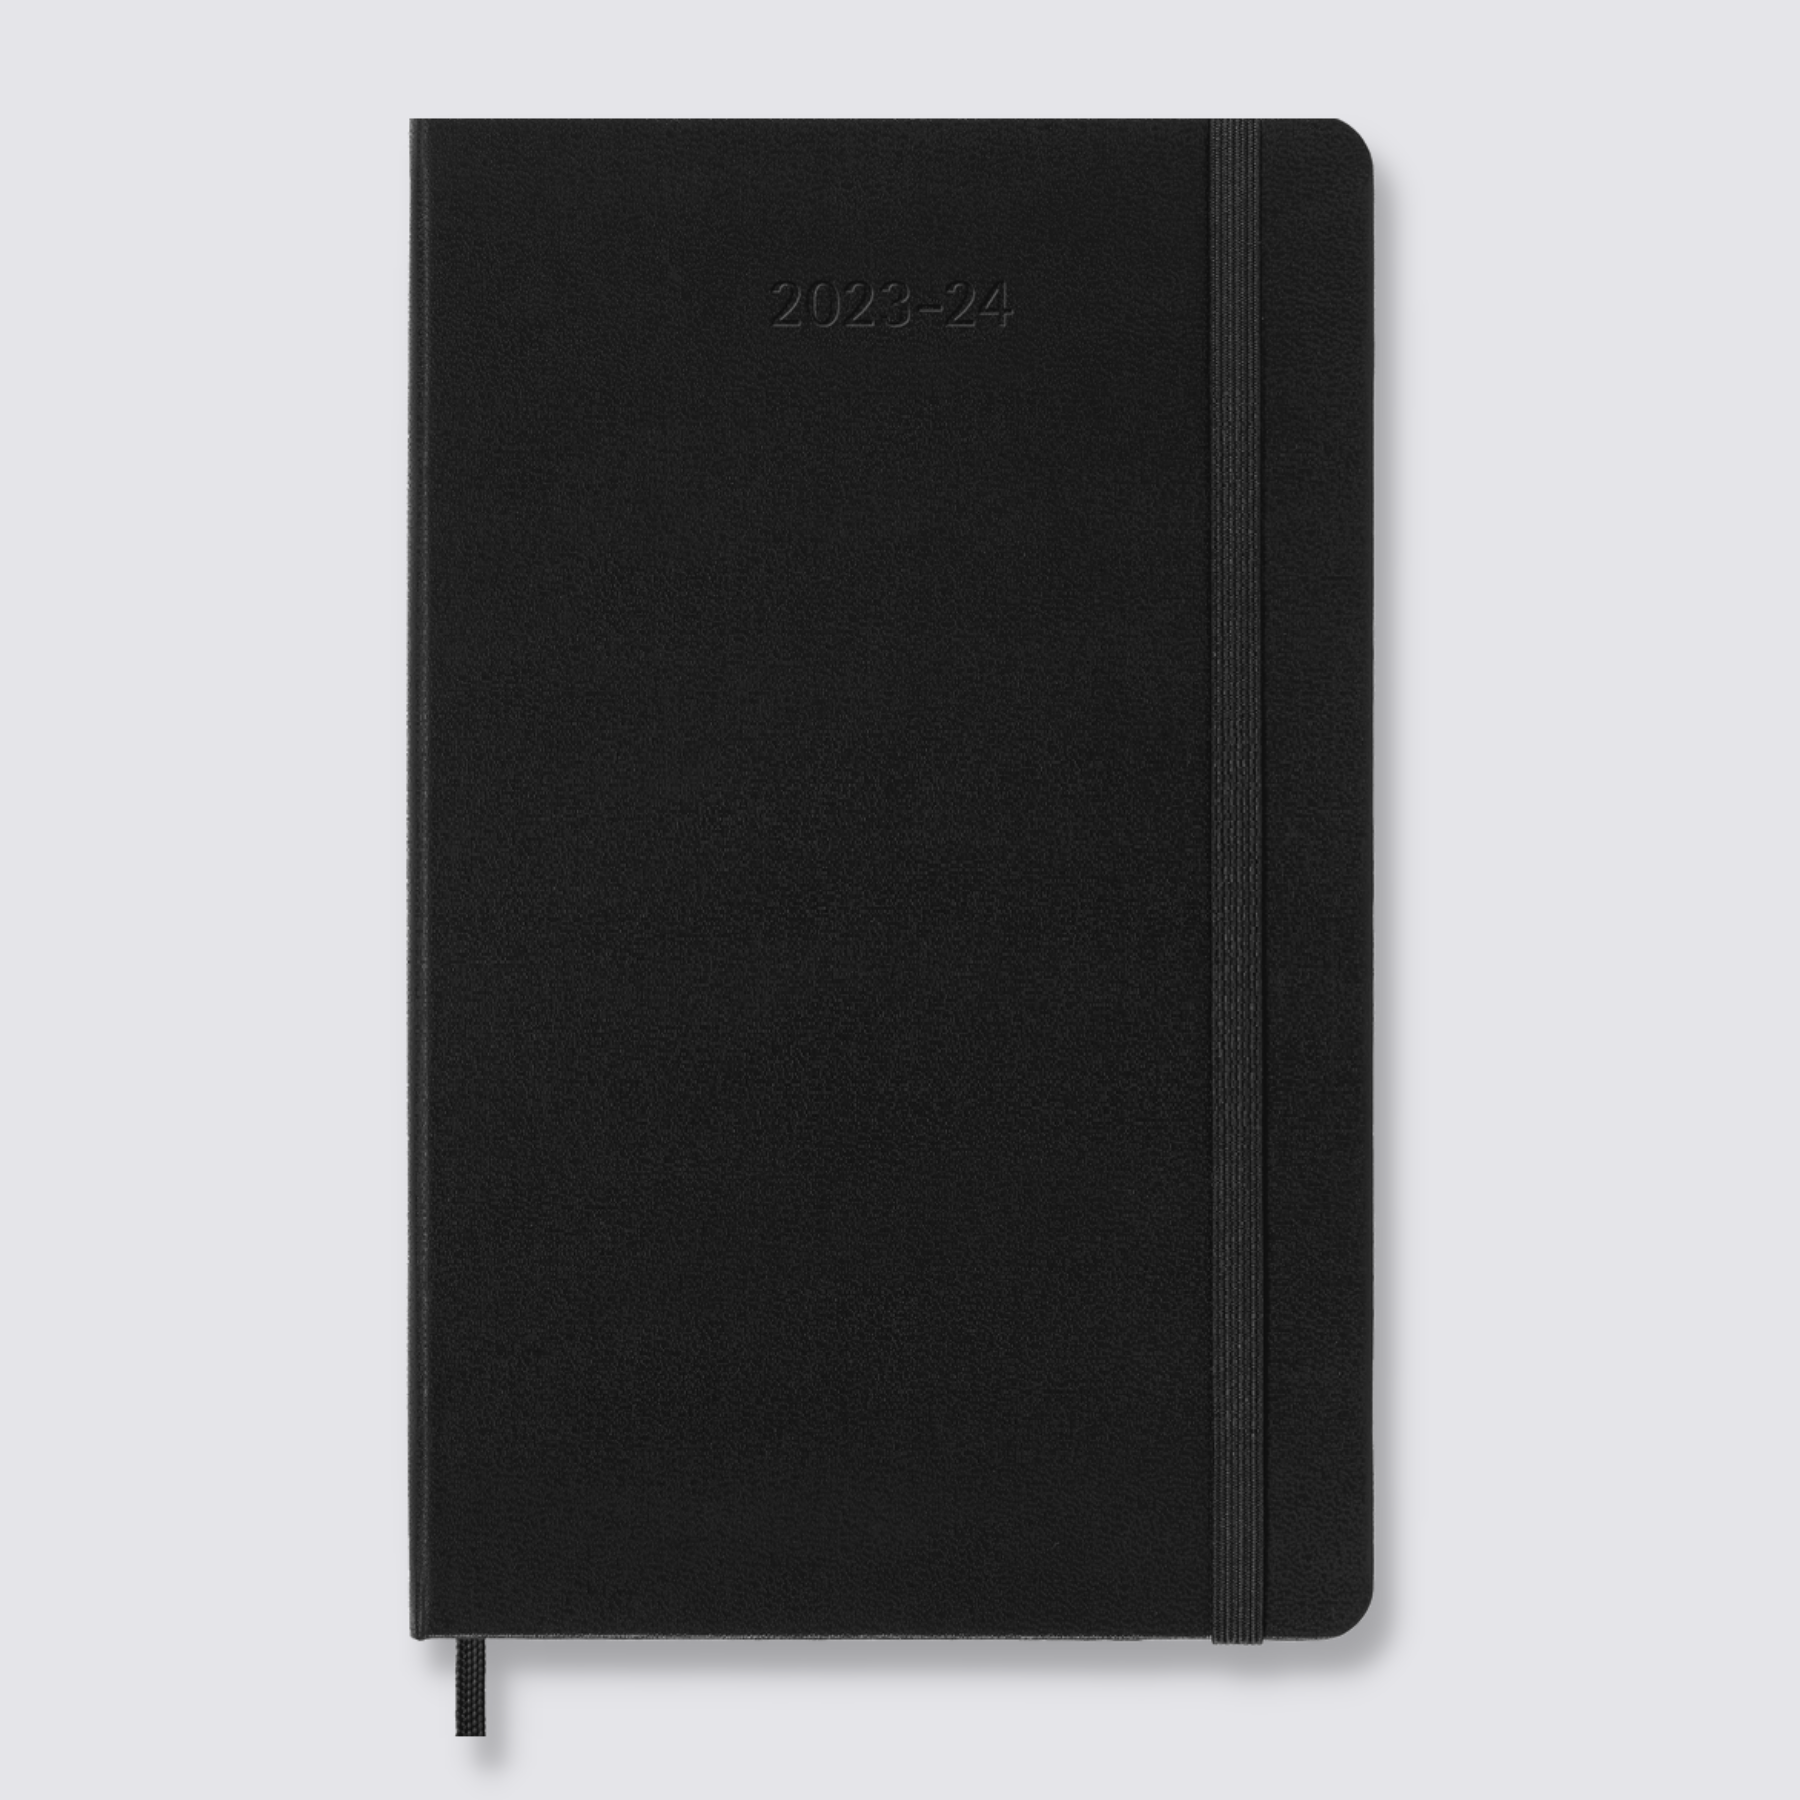 2023-2024 Daily Hard Cover Diary Large